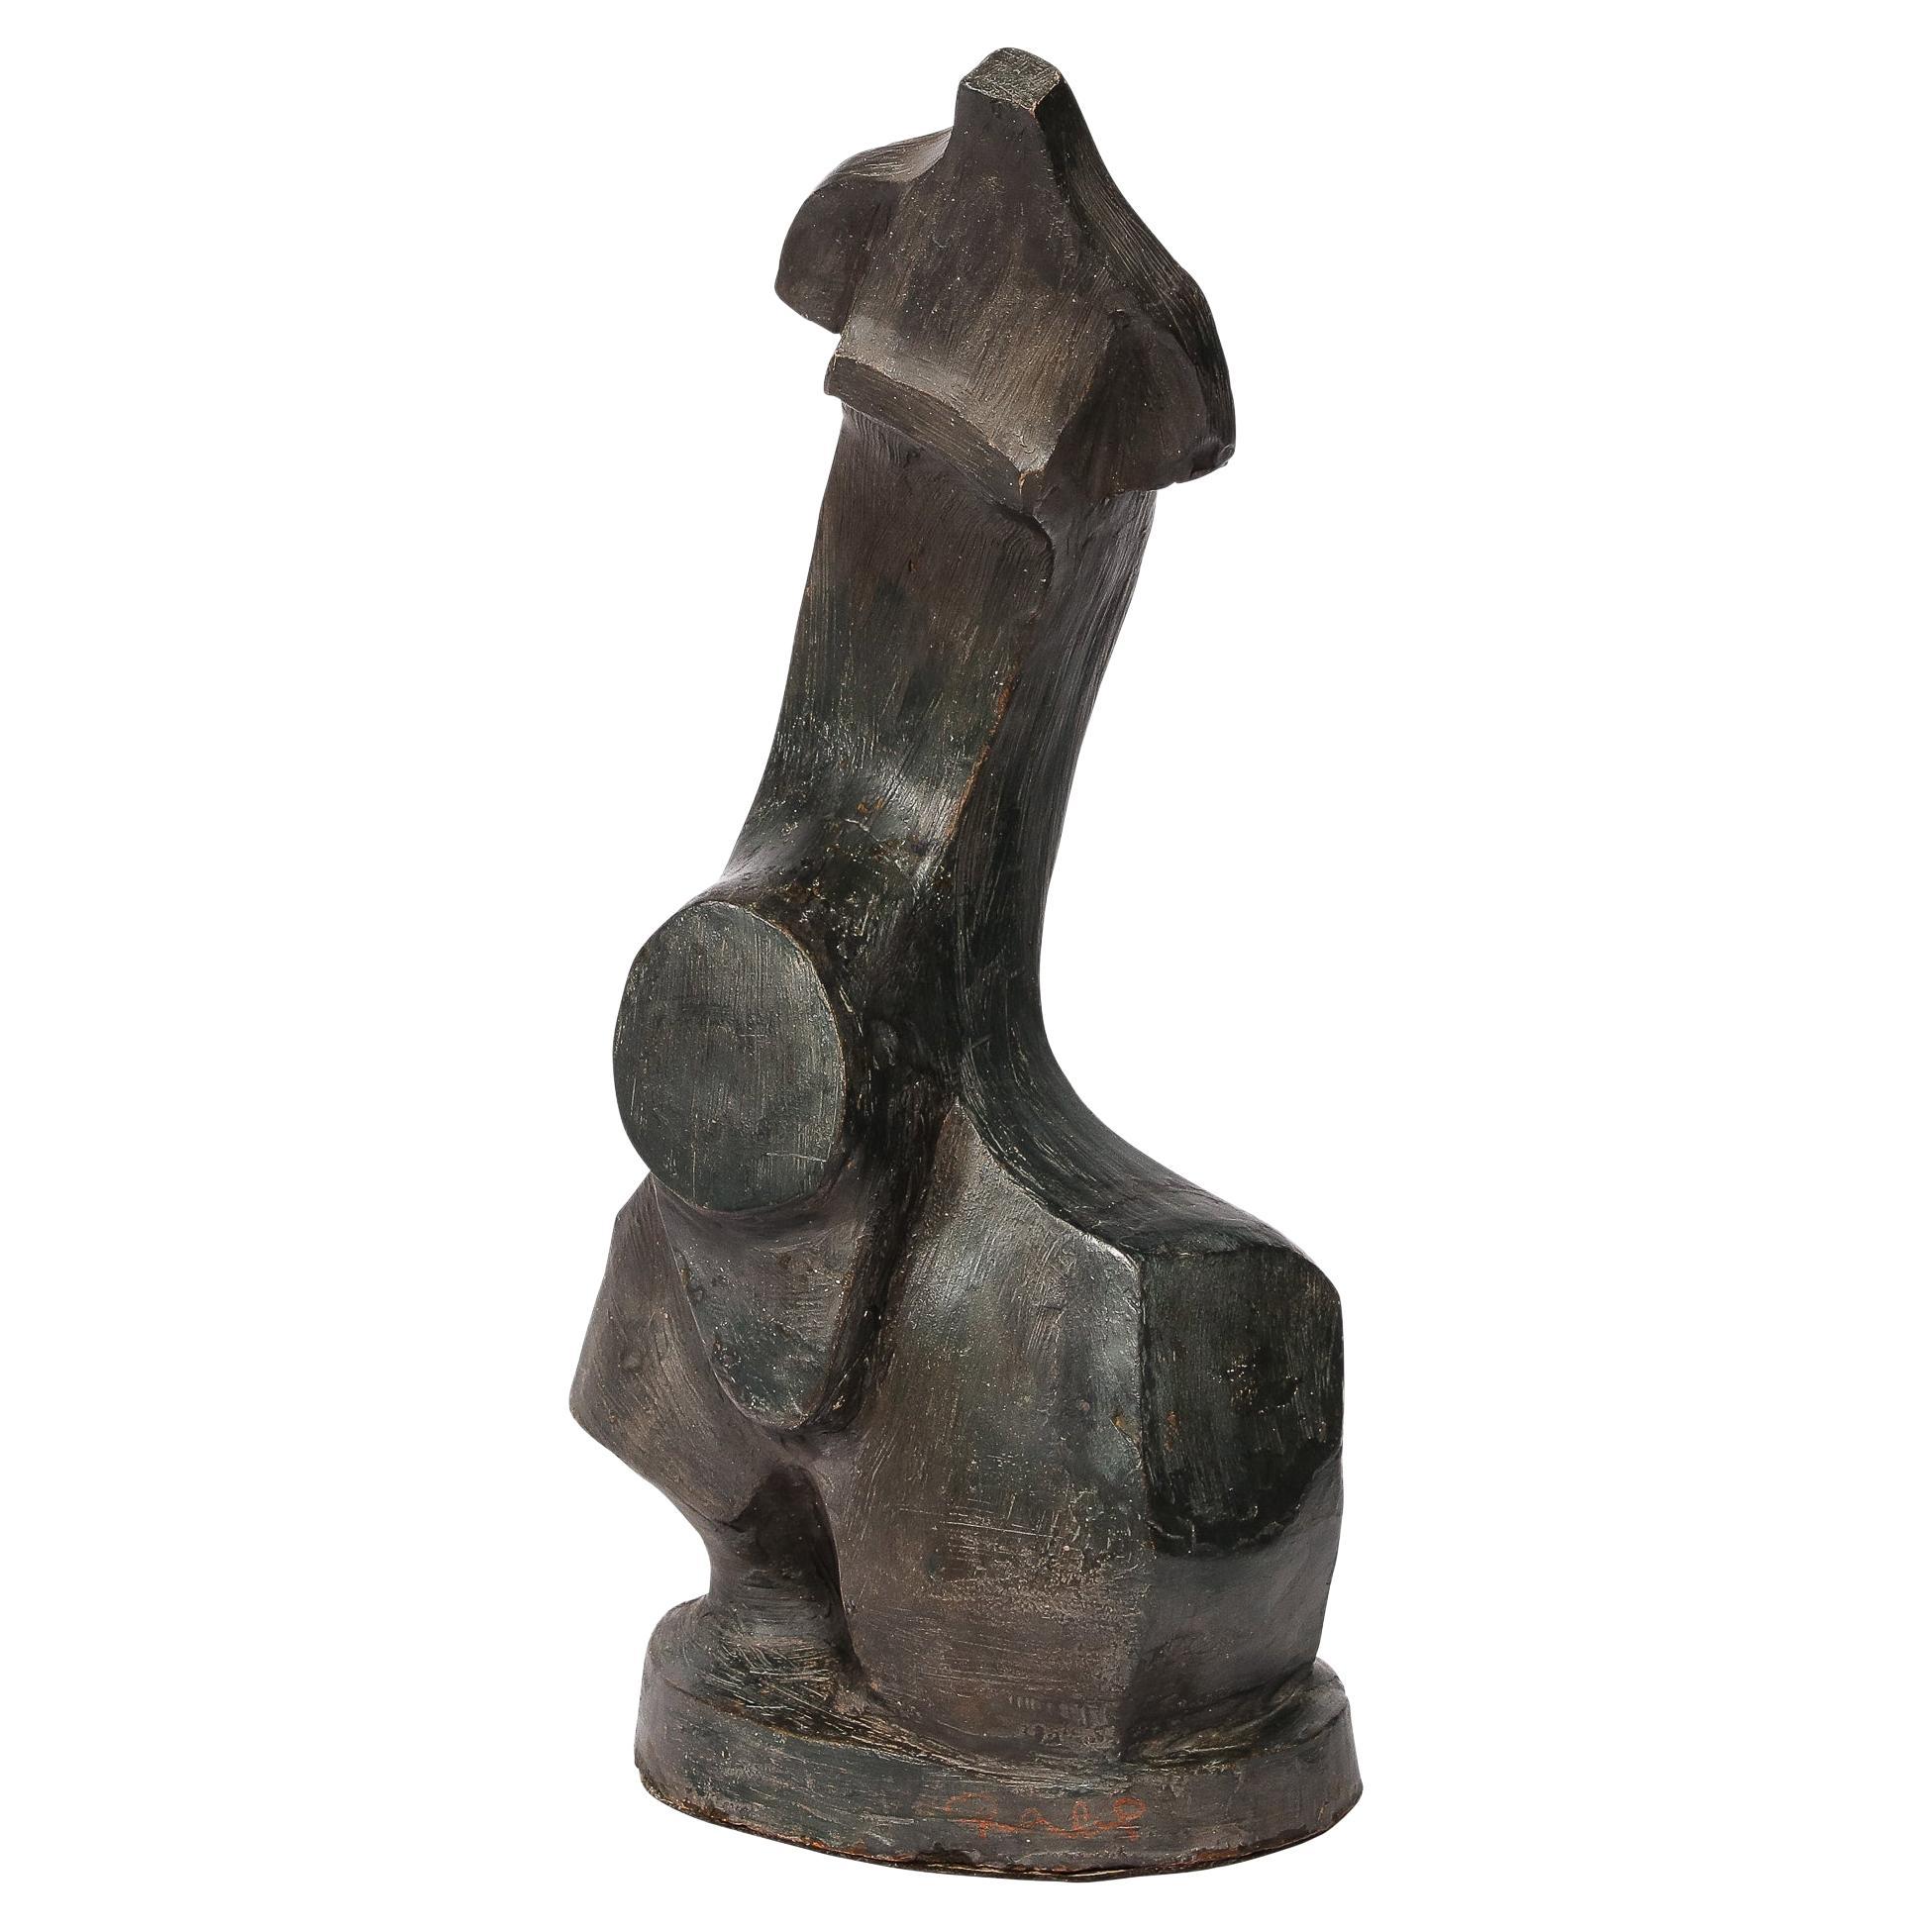 Hand-Sculpted French Cubist Abstract Sculpture in Terracotta Signed "Philip" For Sale